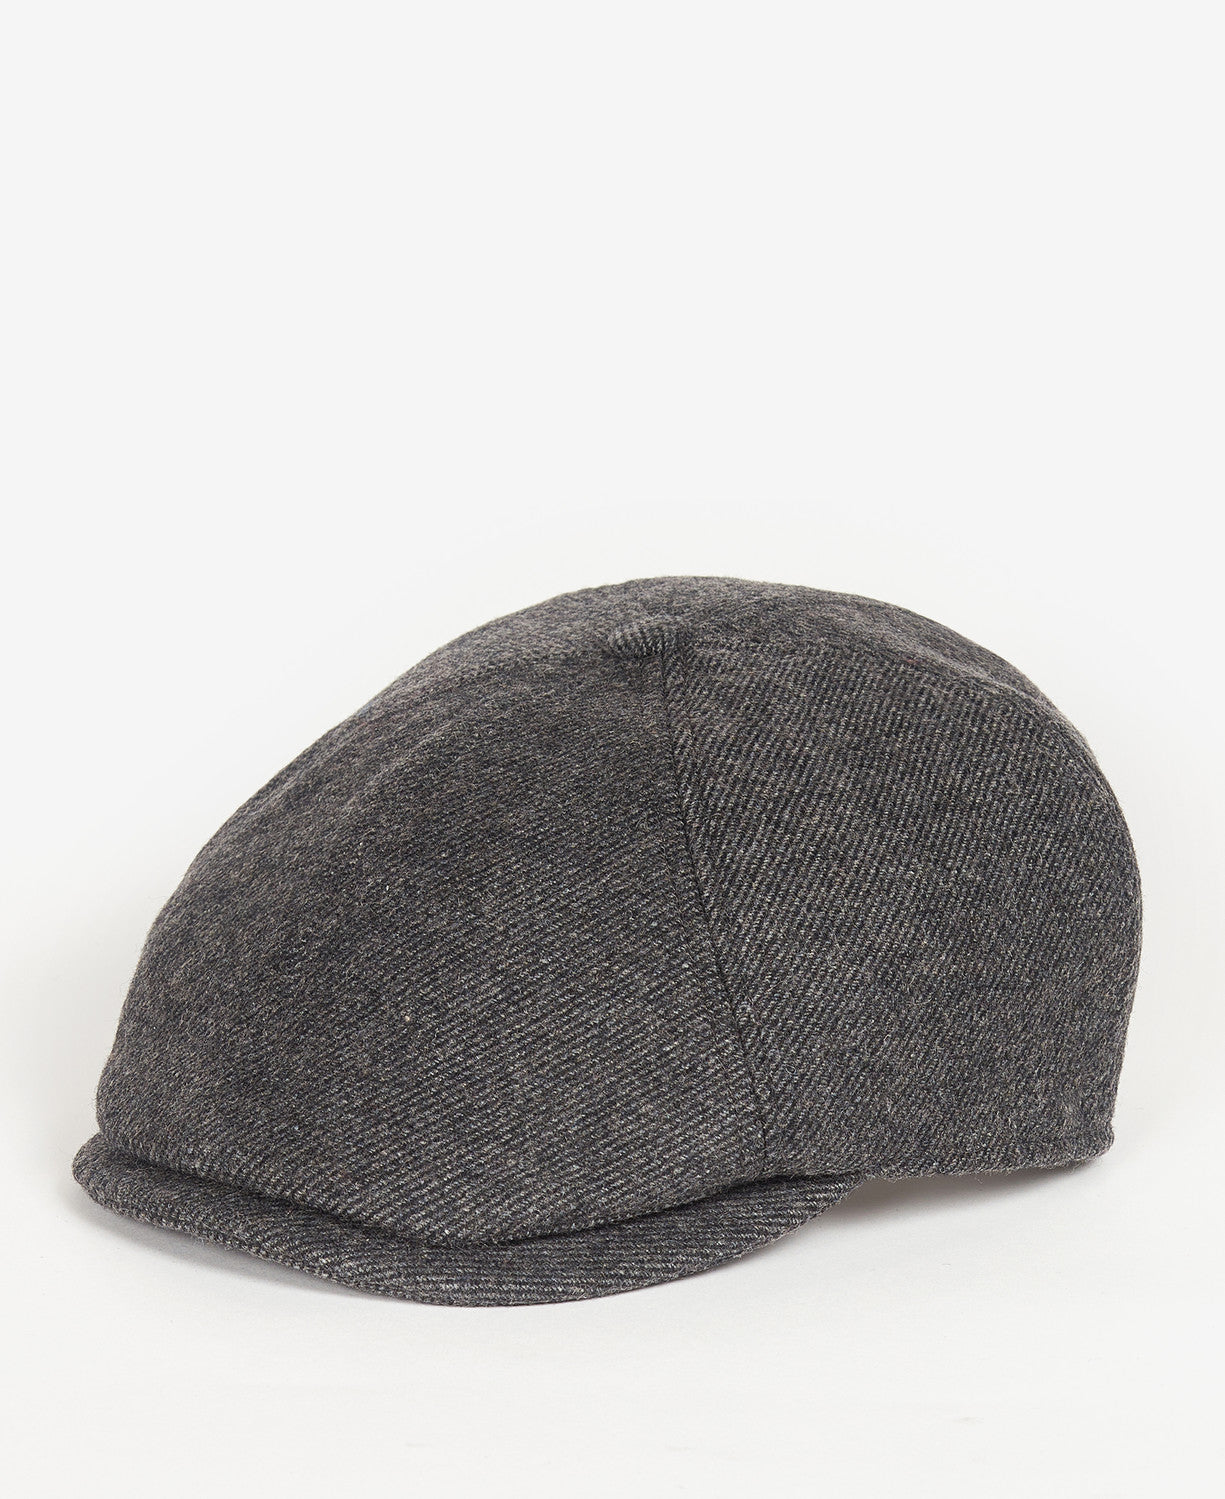 Barbour Claymore Baker - Charcoal Grey